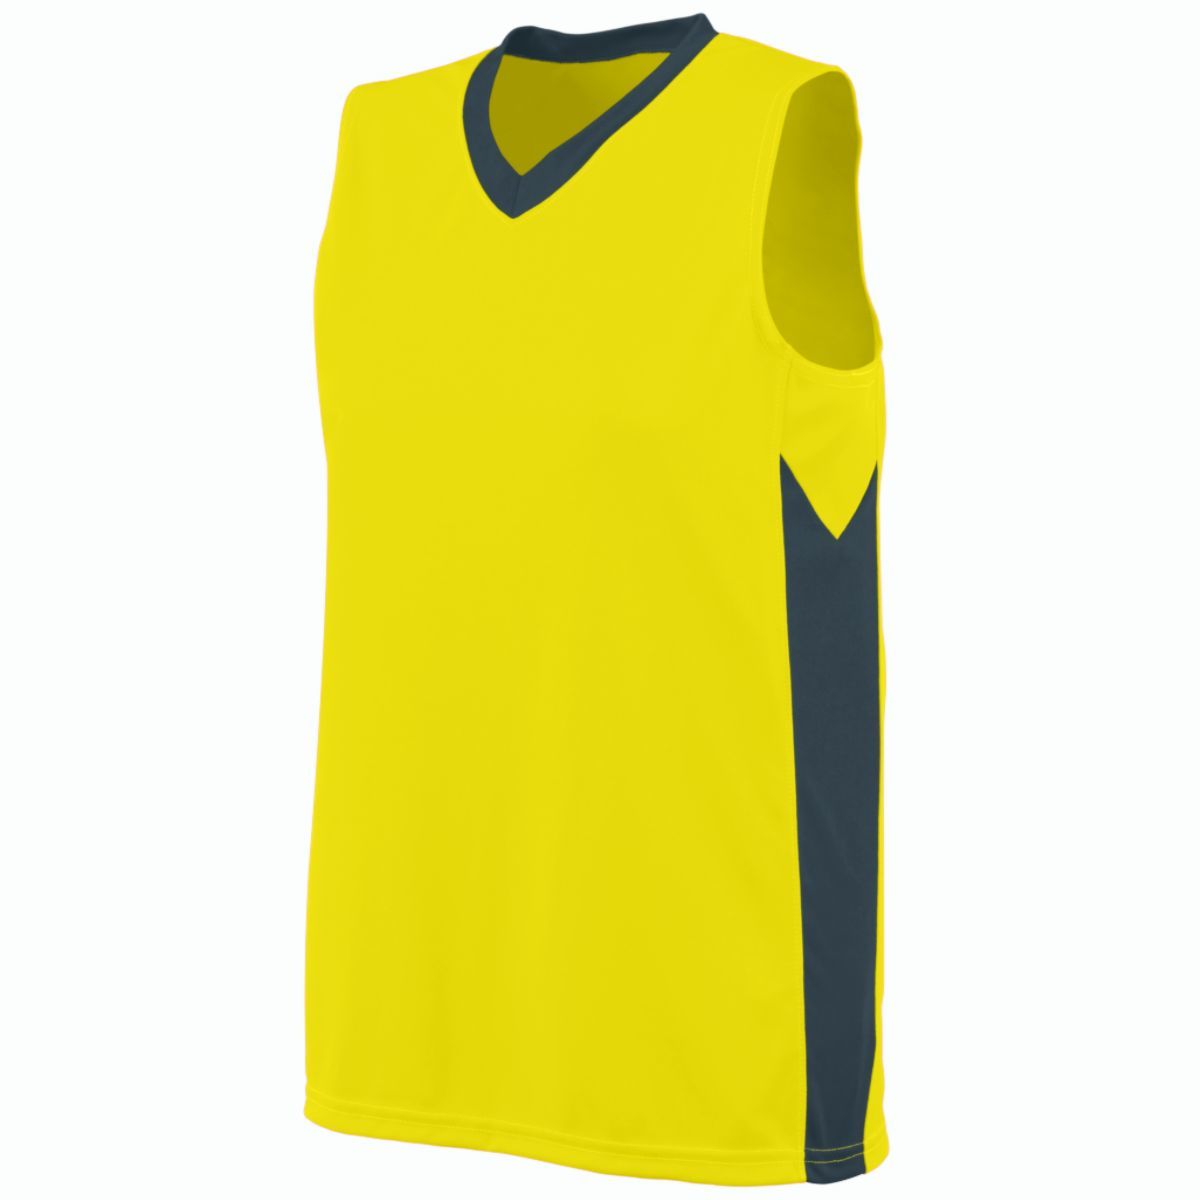 Augusta Sportswear Ladies Block Out Jersey in Power Yellow/Slate  -Part of the Ladies, Ladies-Jersey, Augusta-Products, Basketball, Shirts, All-Sports, All-Sports-1 product lines at KanaleyCreations.com